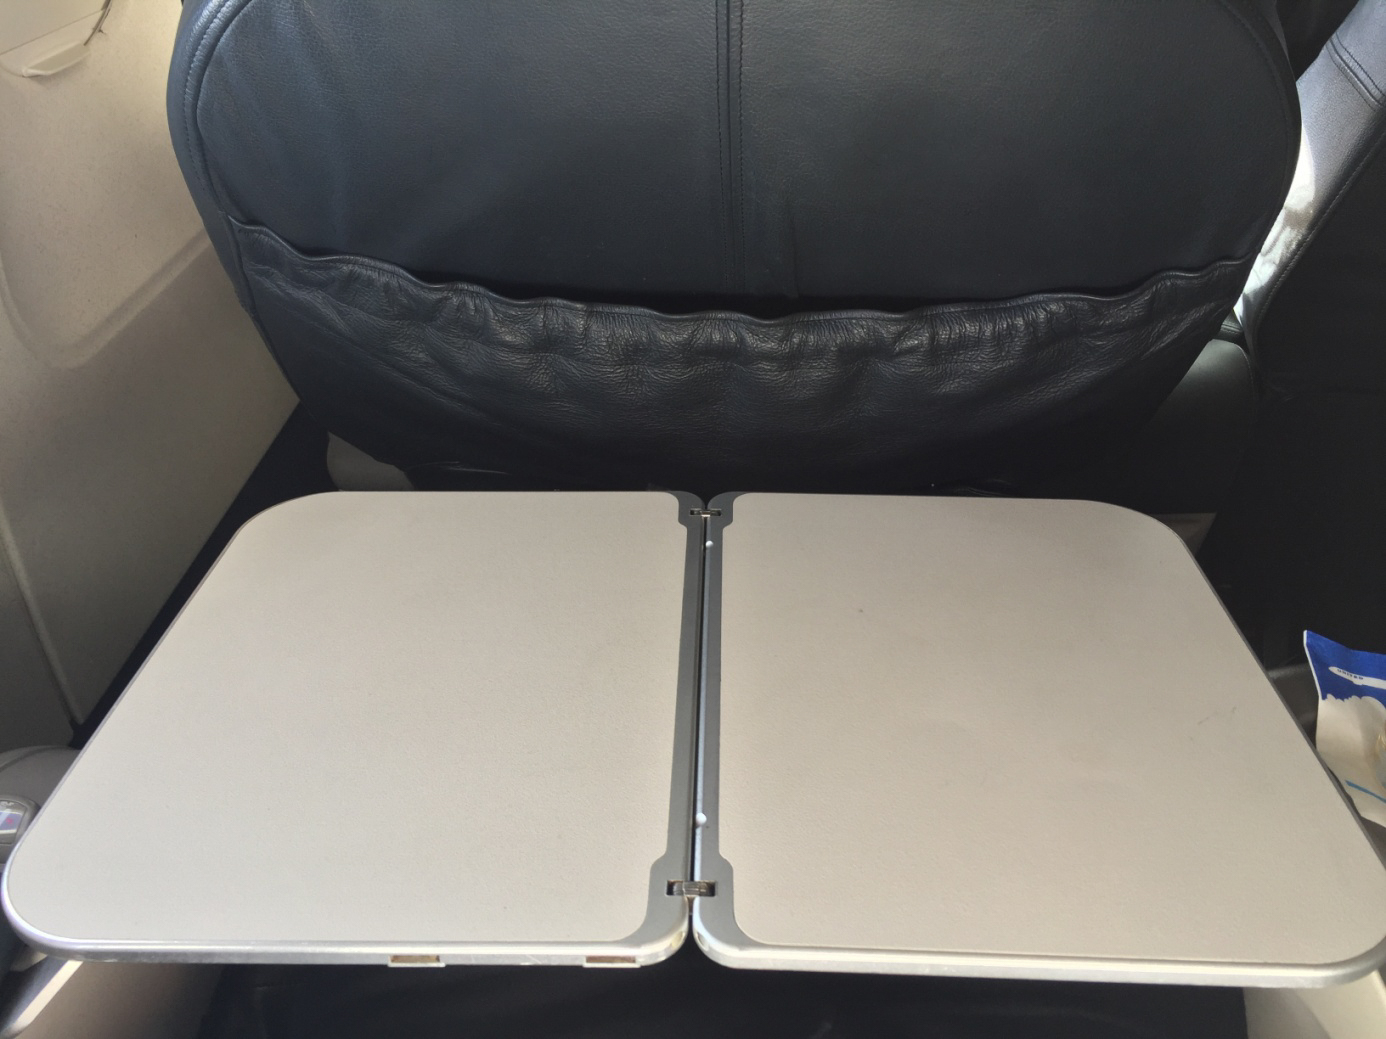 United Airlines Domestic First Class Tablett